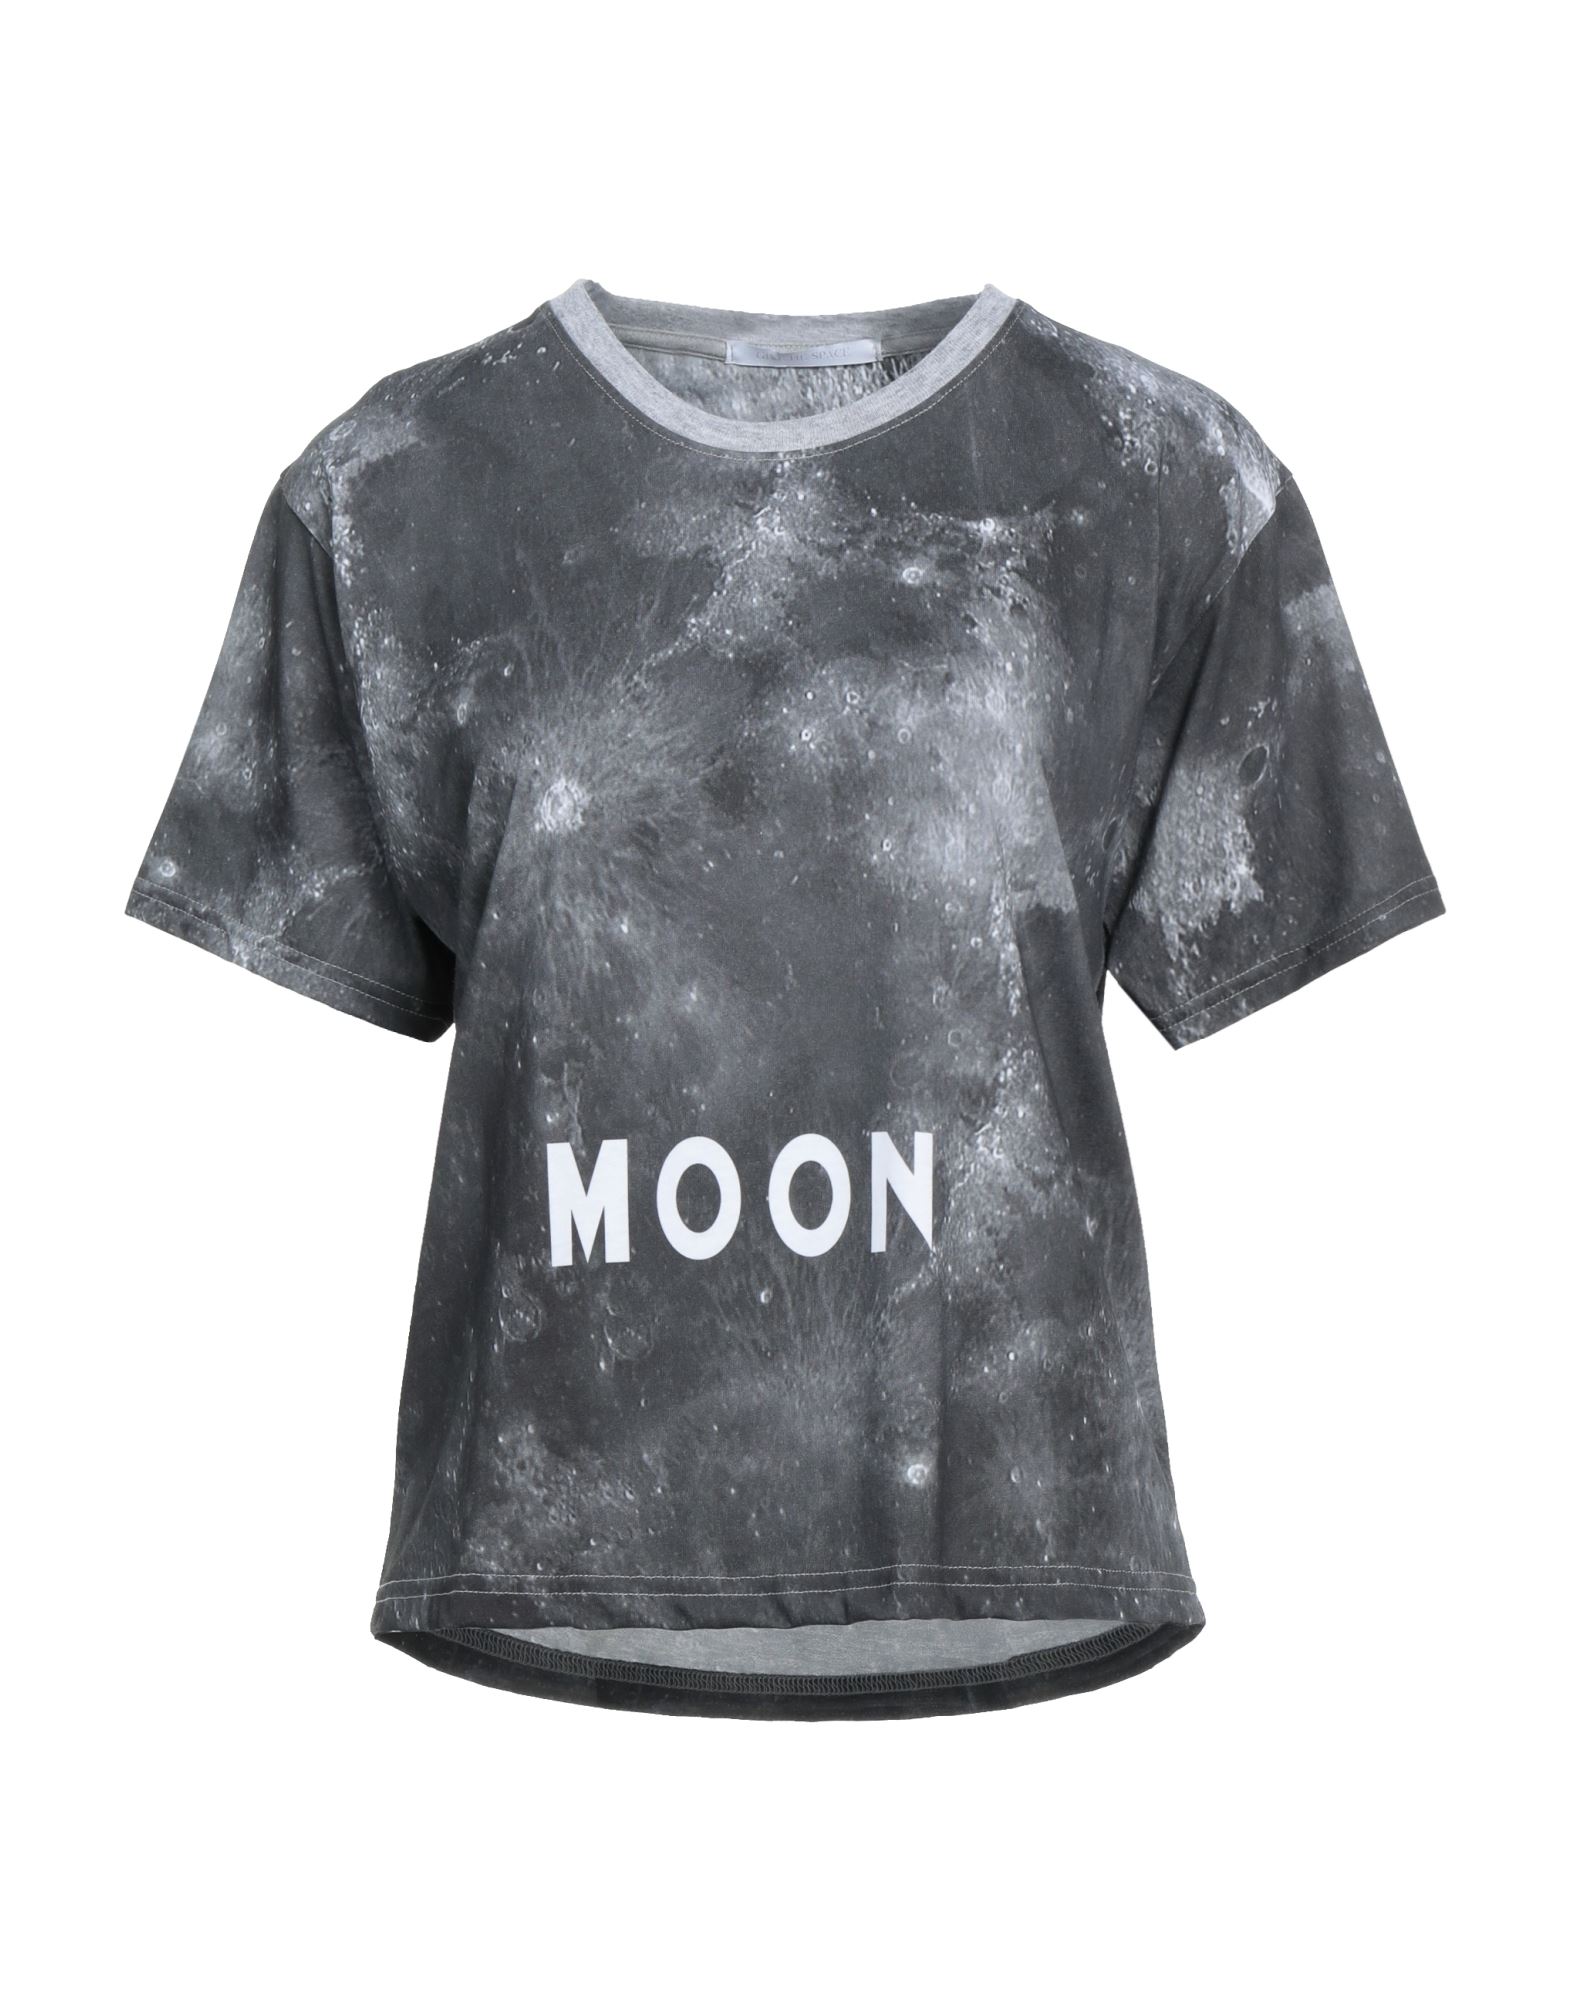 Give Me Space T-shirts In Steel Grey